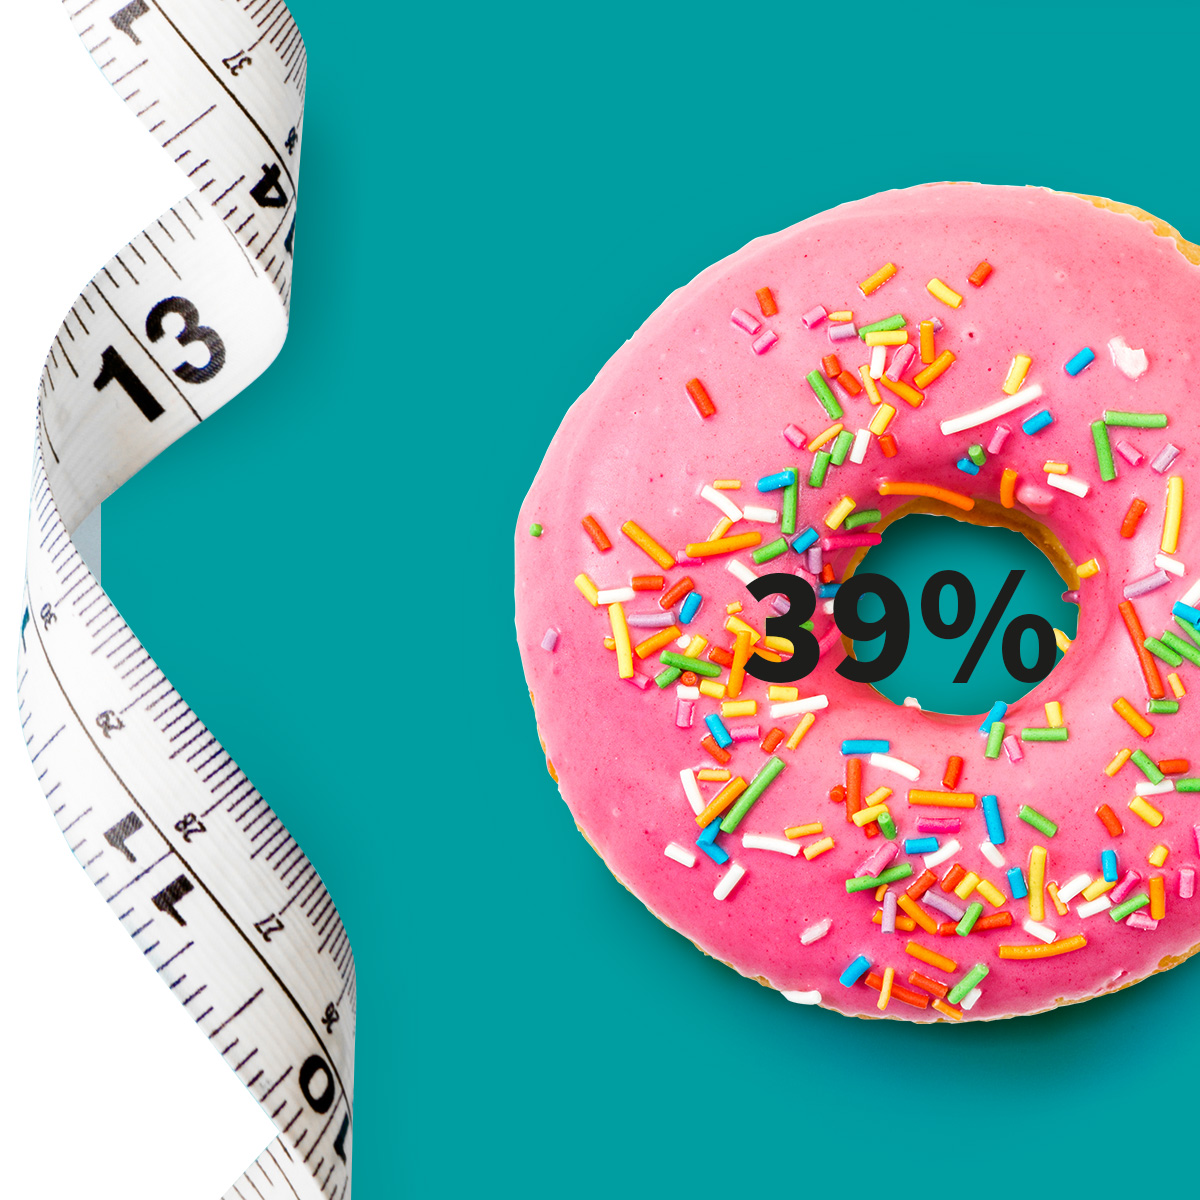 [MEA.COM-en MEA (english)] •	A measuring tape and a doughnut with pink icing and colourful sugar sprinkle as a metaphor for obesity